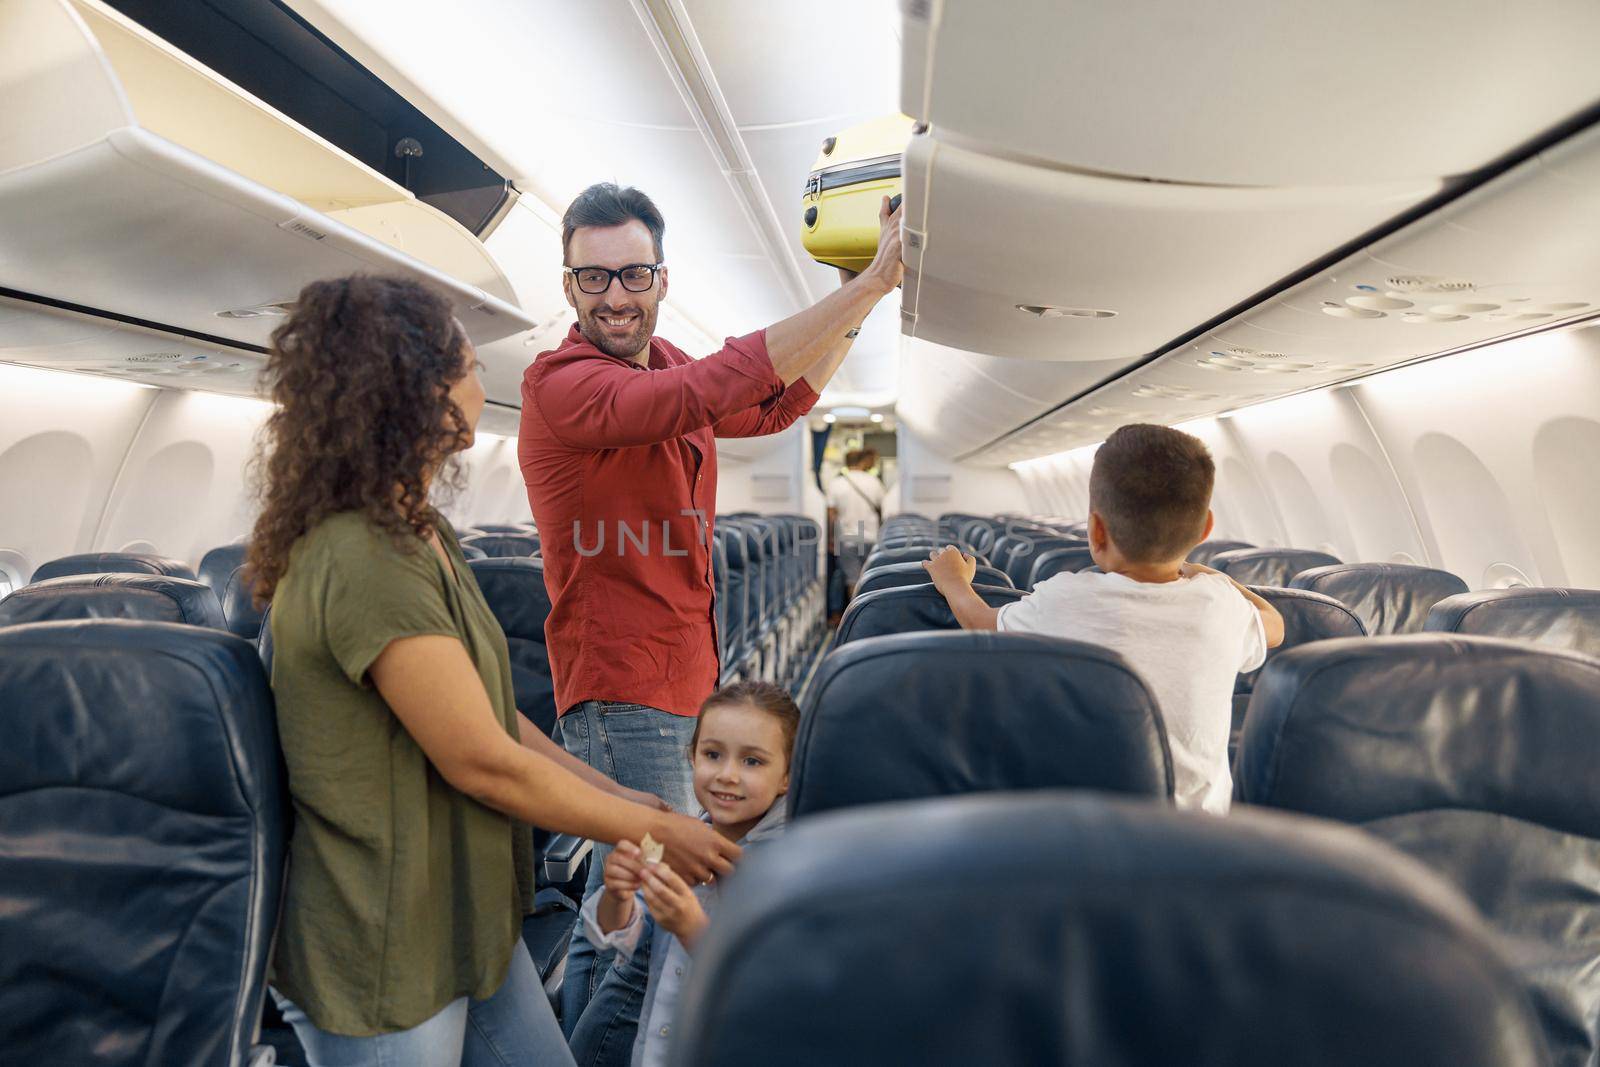 Cheerful man looking at his wife with a smile and putting carry on luggage in compartment while traveling together with his family by plane by Yaroslav_astakhov